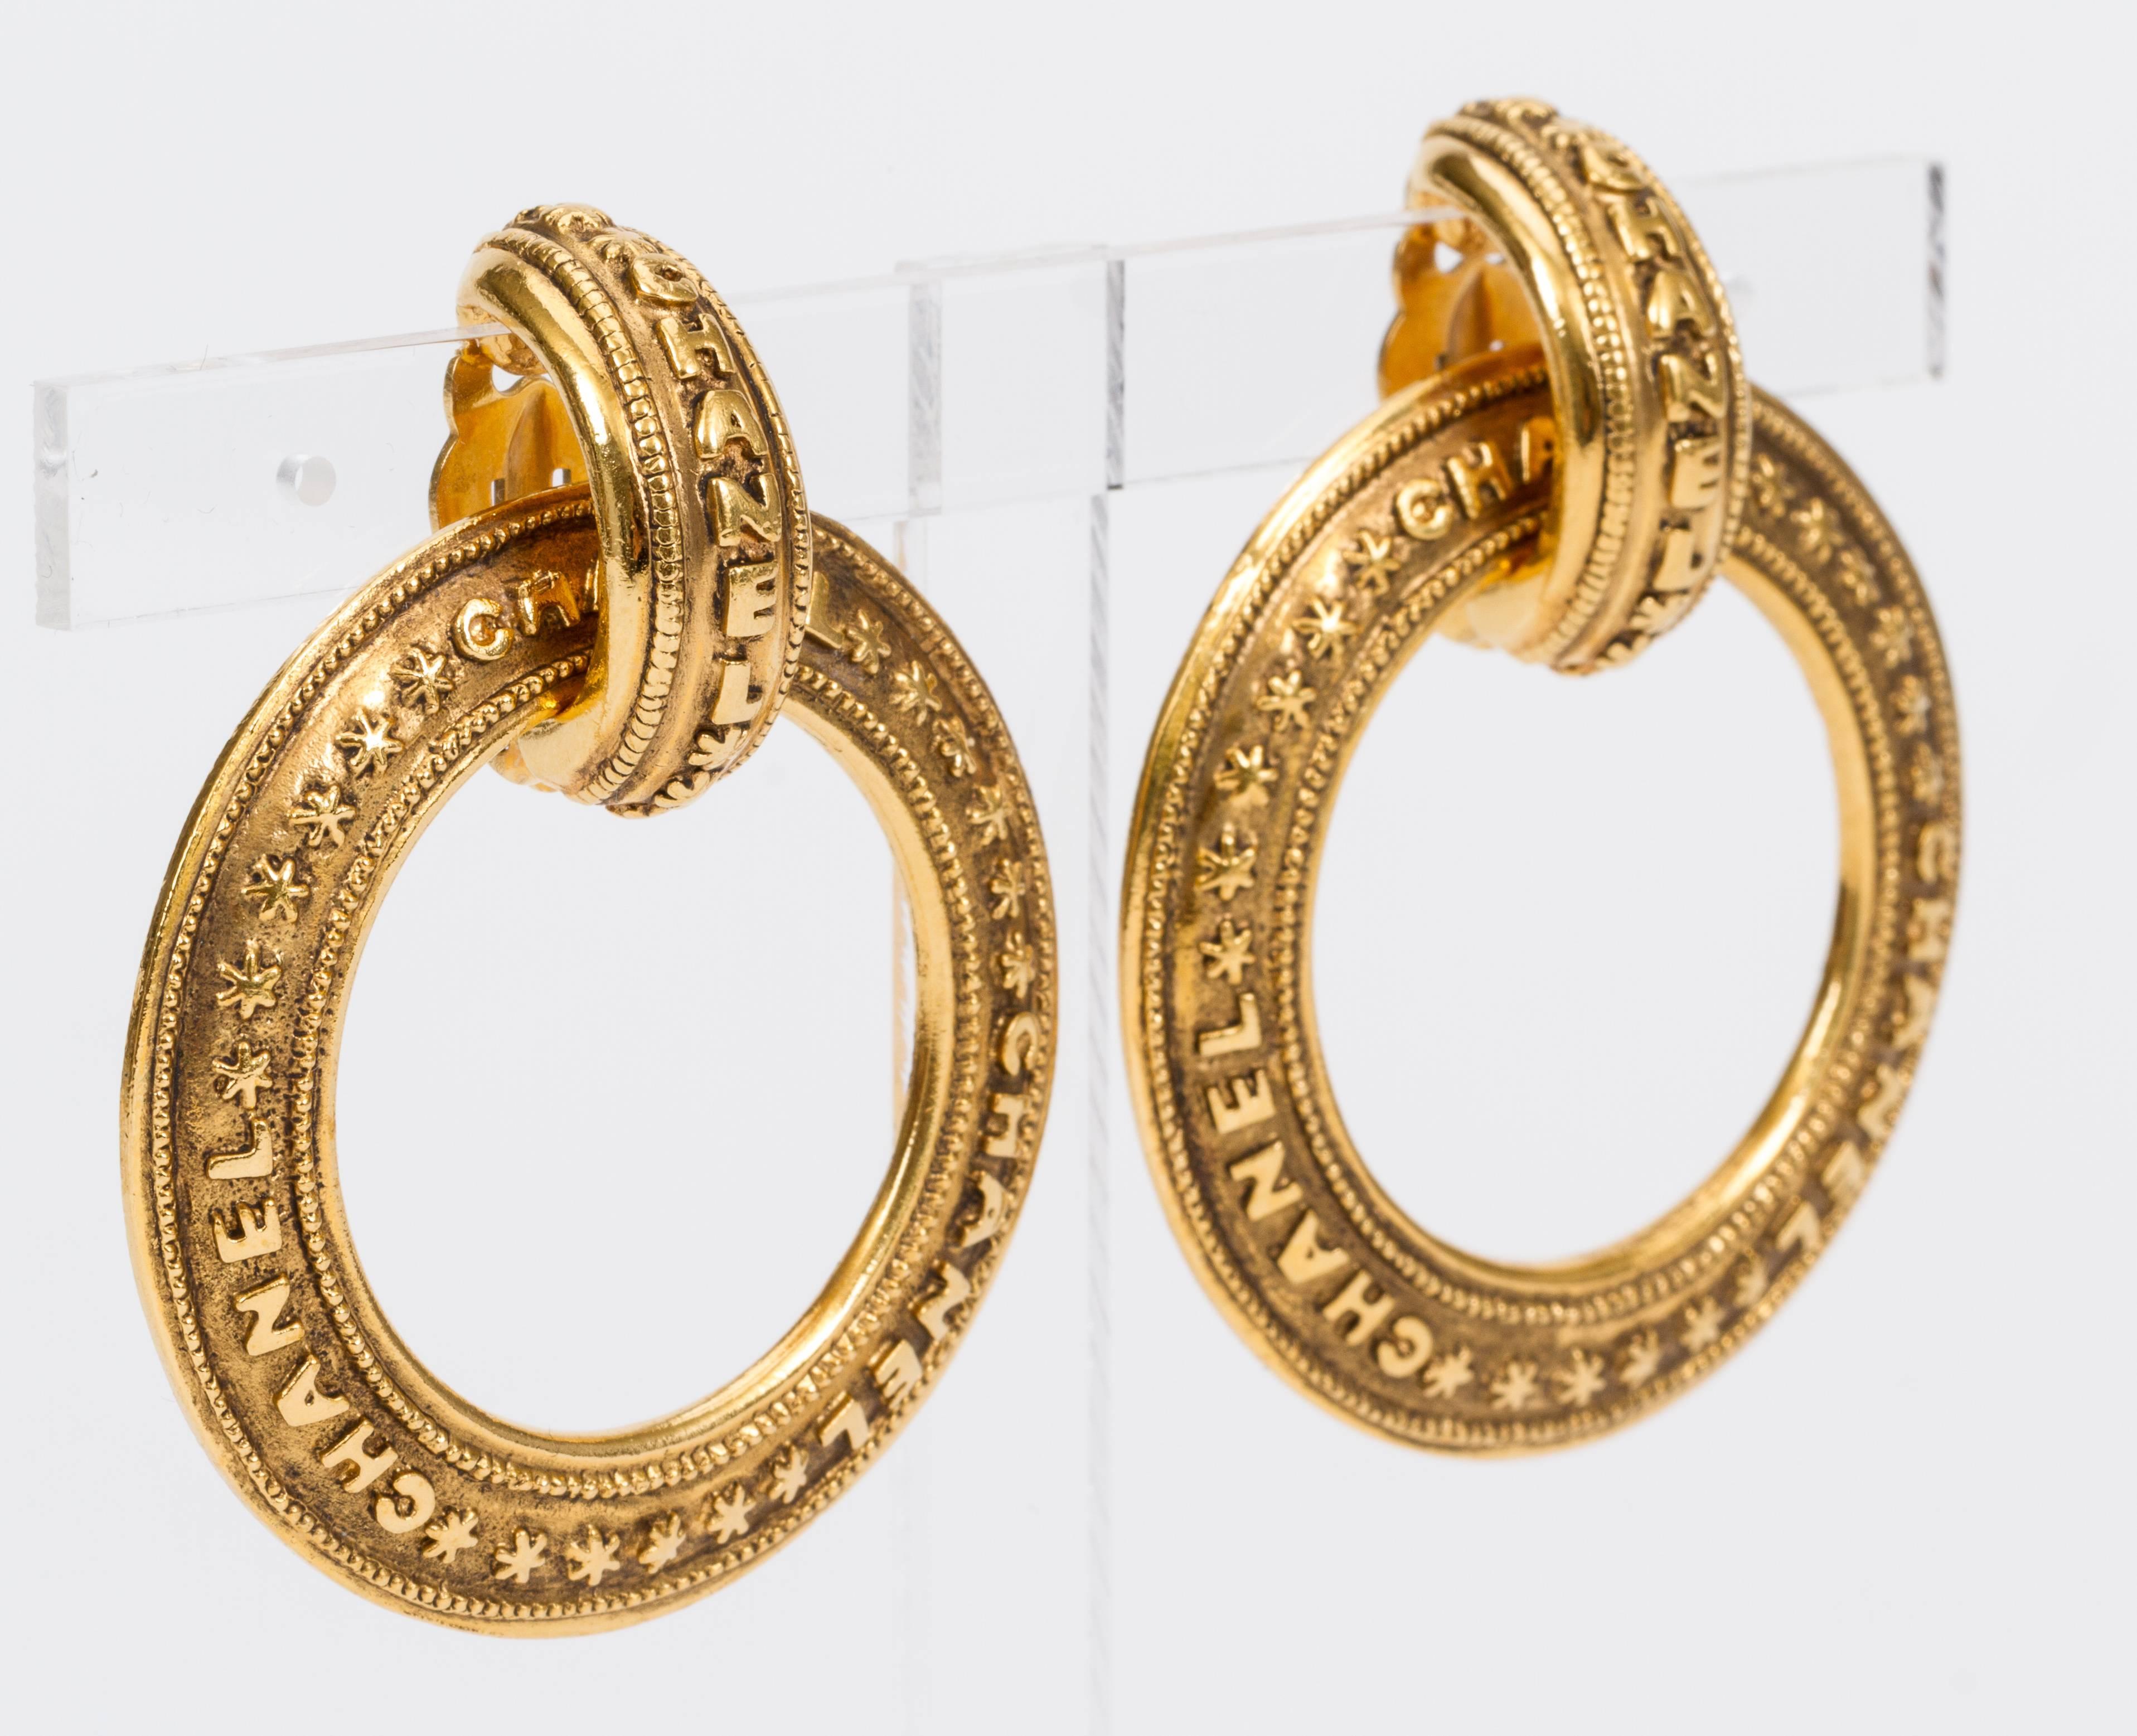 1980s Chanel clip-back earrings with detachable hoops in 18K plated metal. Comes with original box.